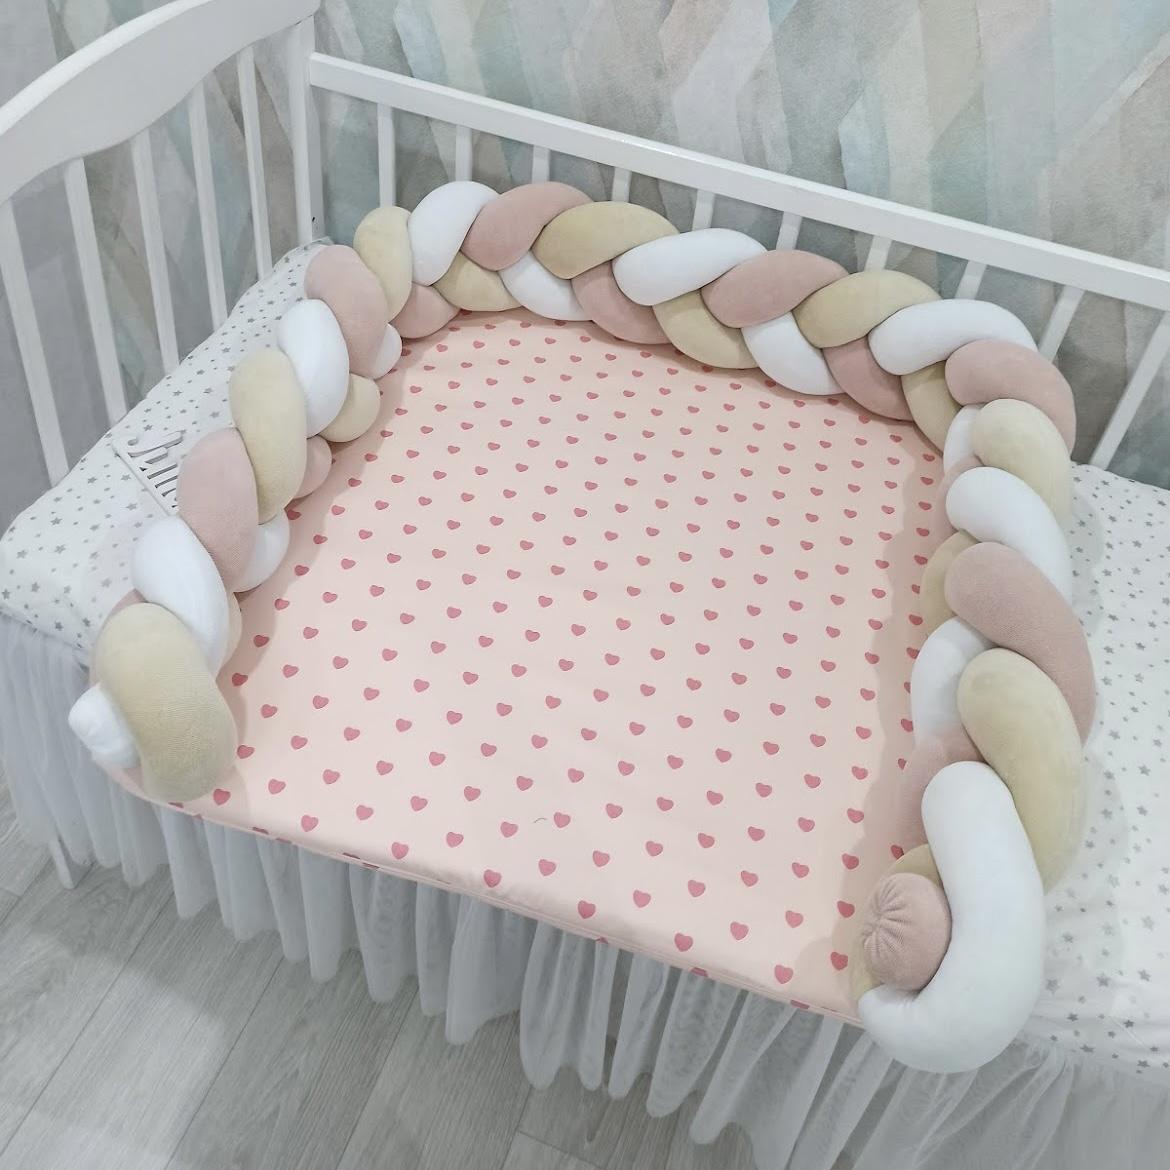 Changing table with white beige pink hearts